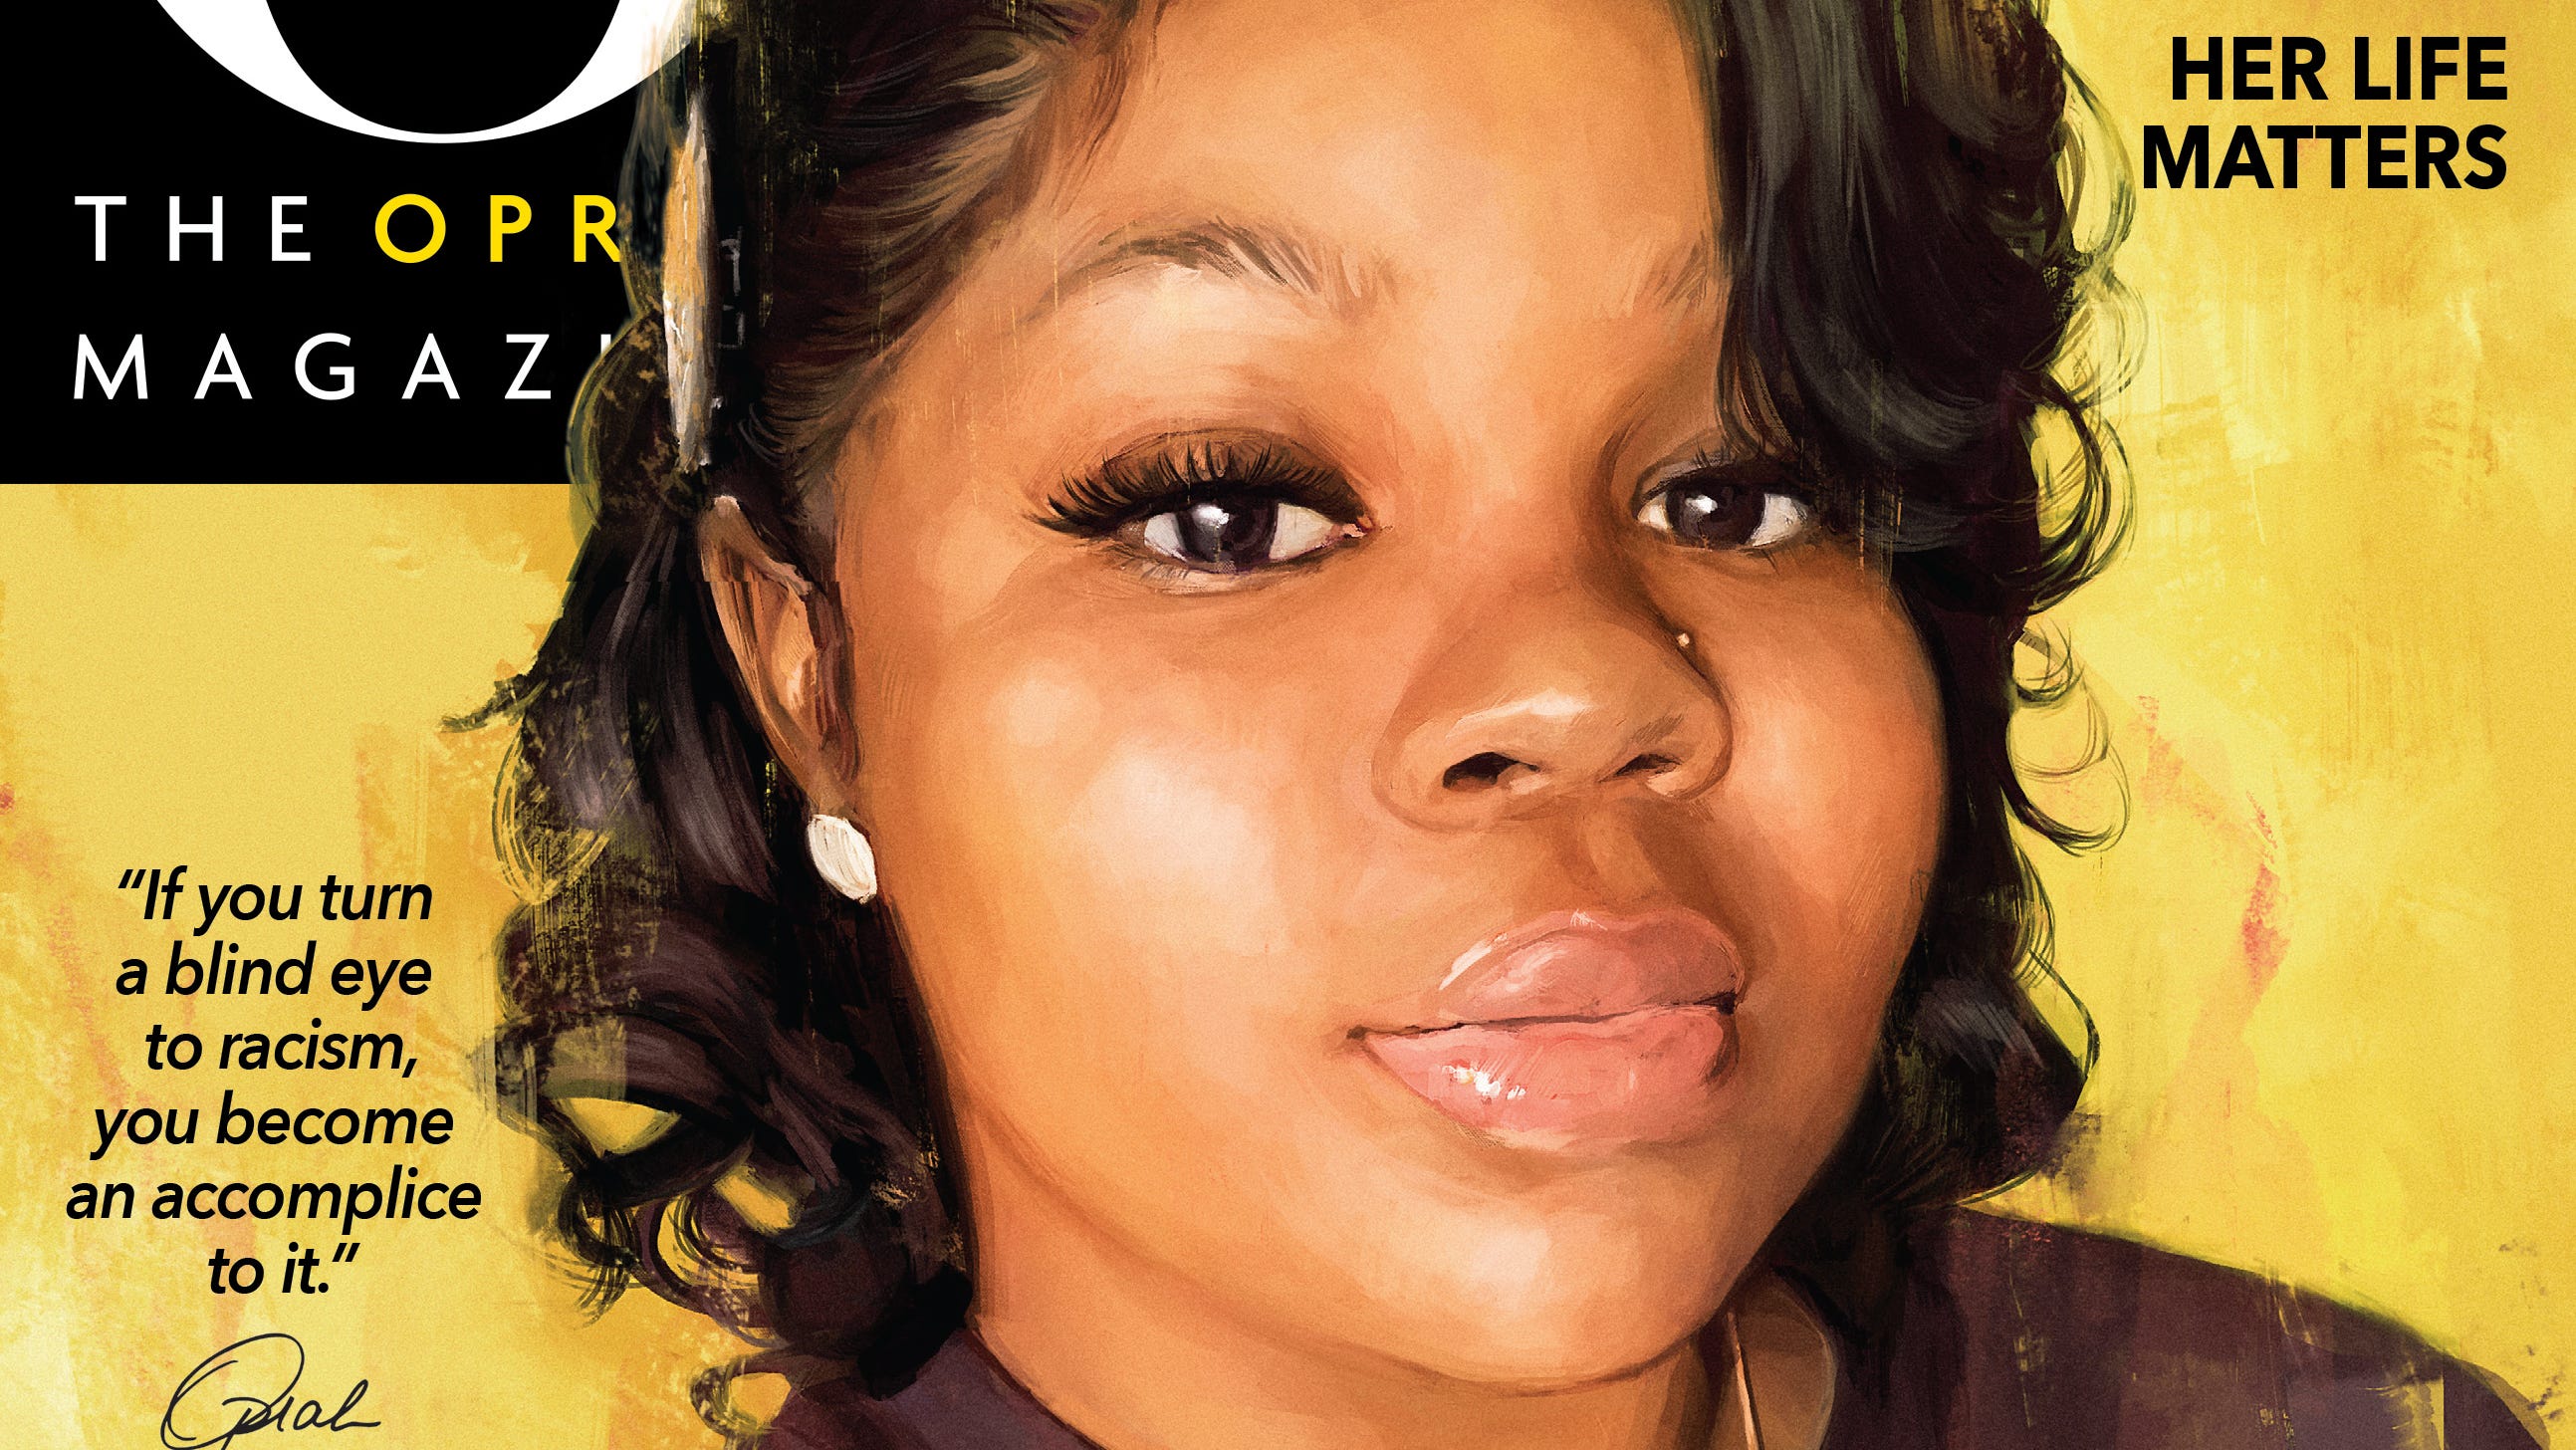 Breonna Taylor to be on Oprah Winfrey magazine cover in place of Oprah